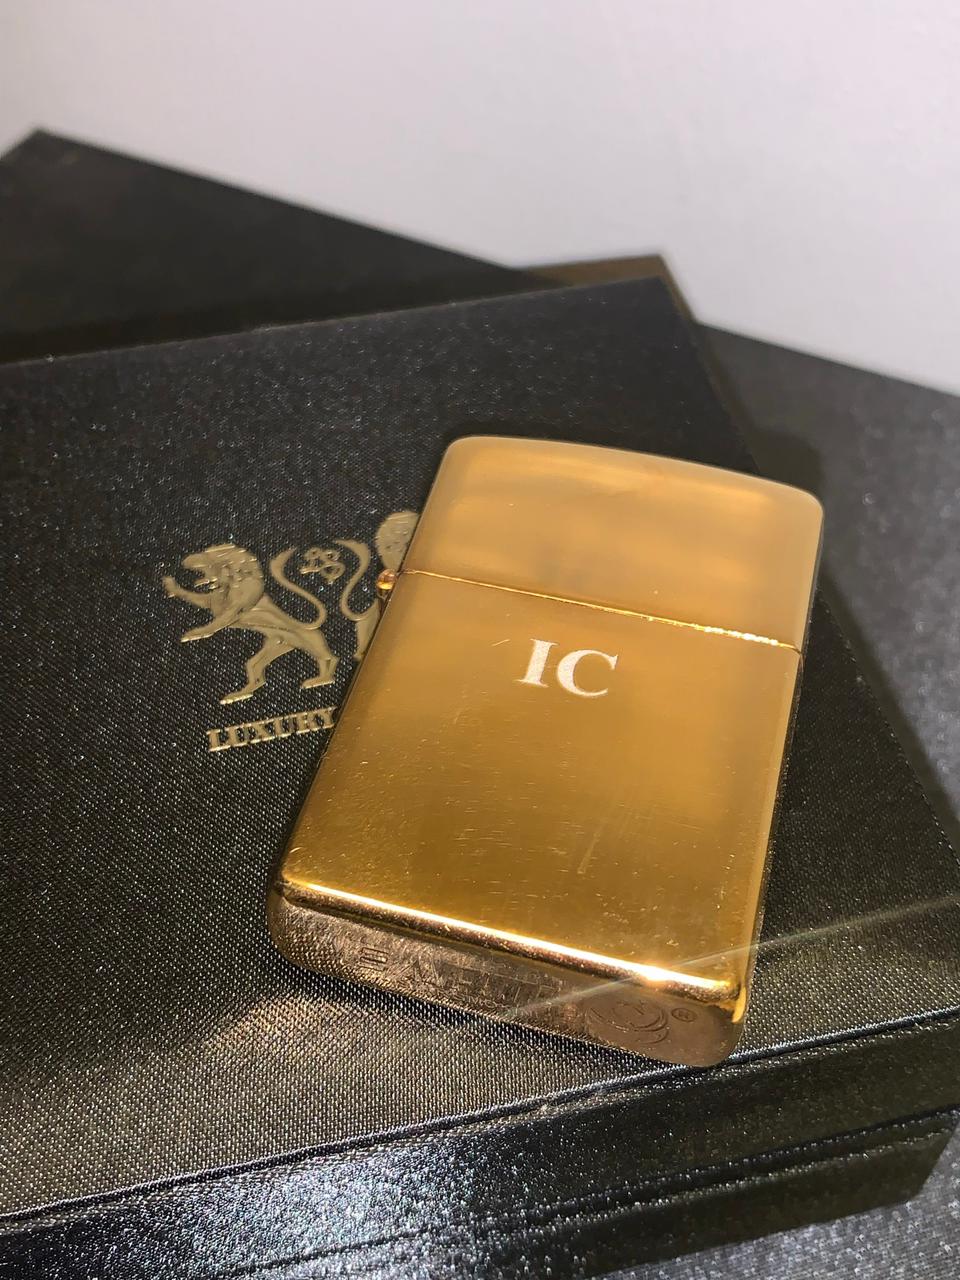 24Kt Gold Plated Classic Z Lighter with Monogrammed Engraved Initials / Name